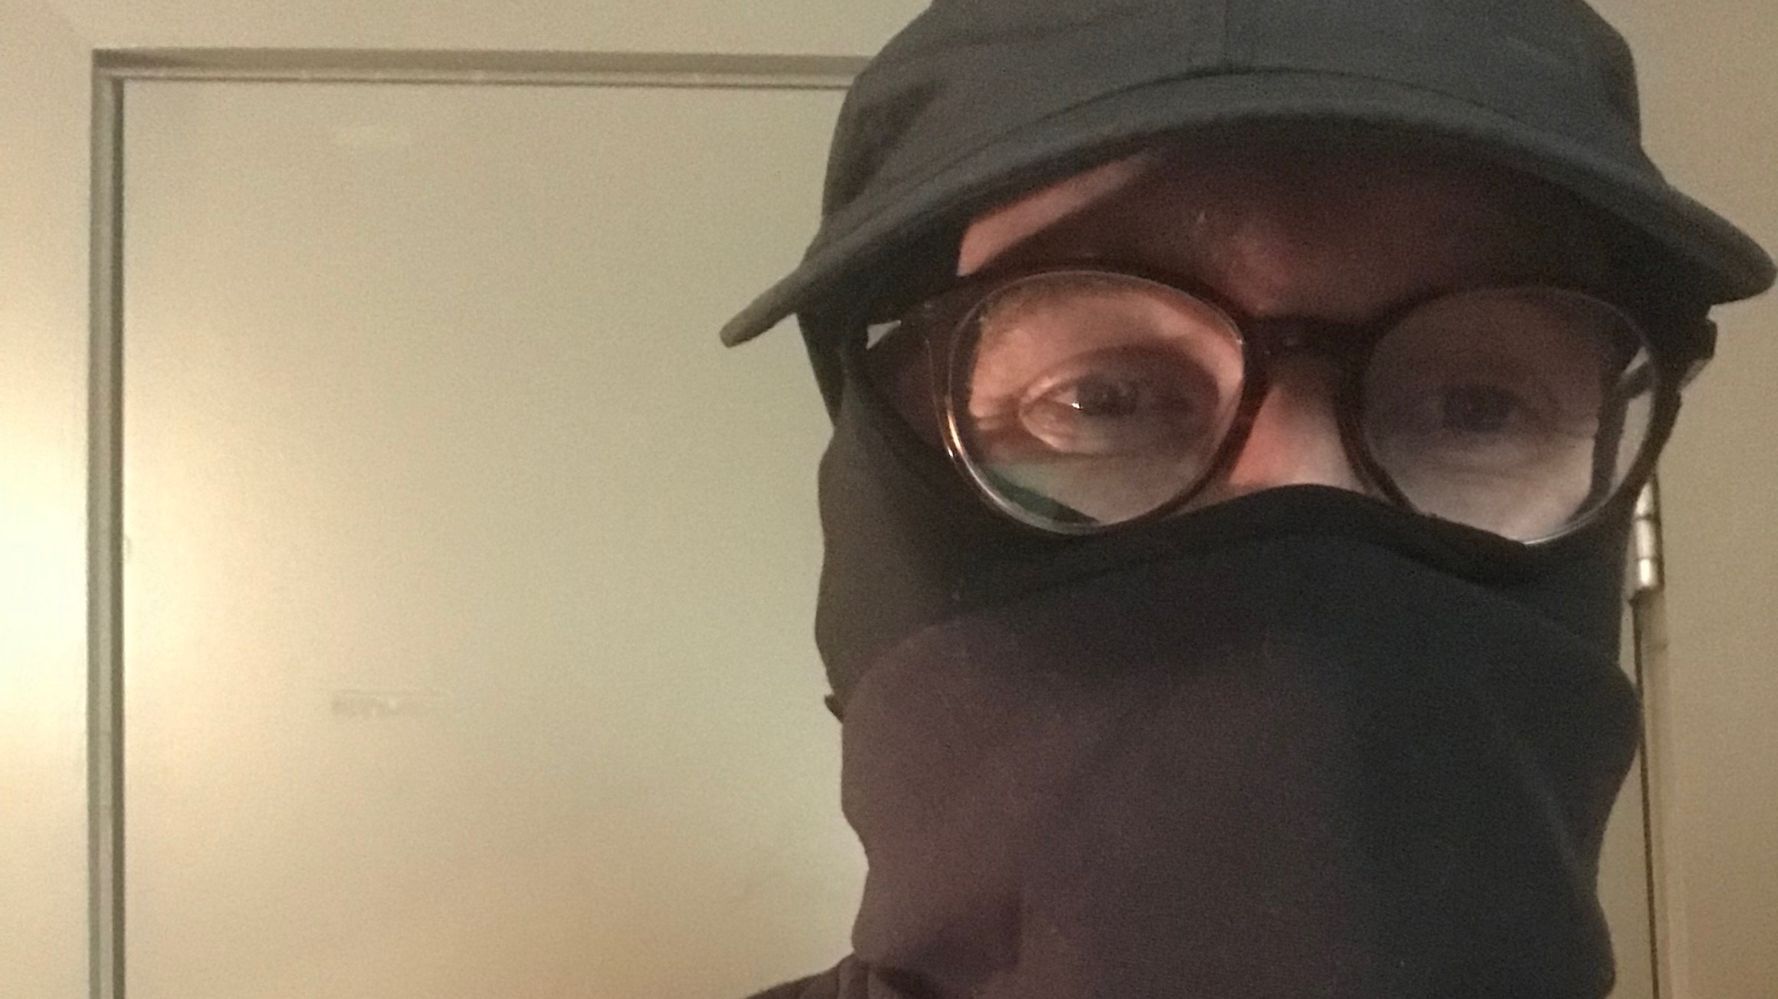 I Was Sent To Jail After A Fight At An Antifa Protest. Here’s What Happened There.